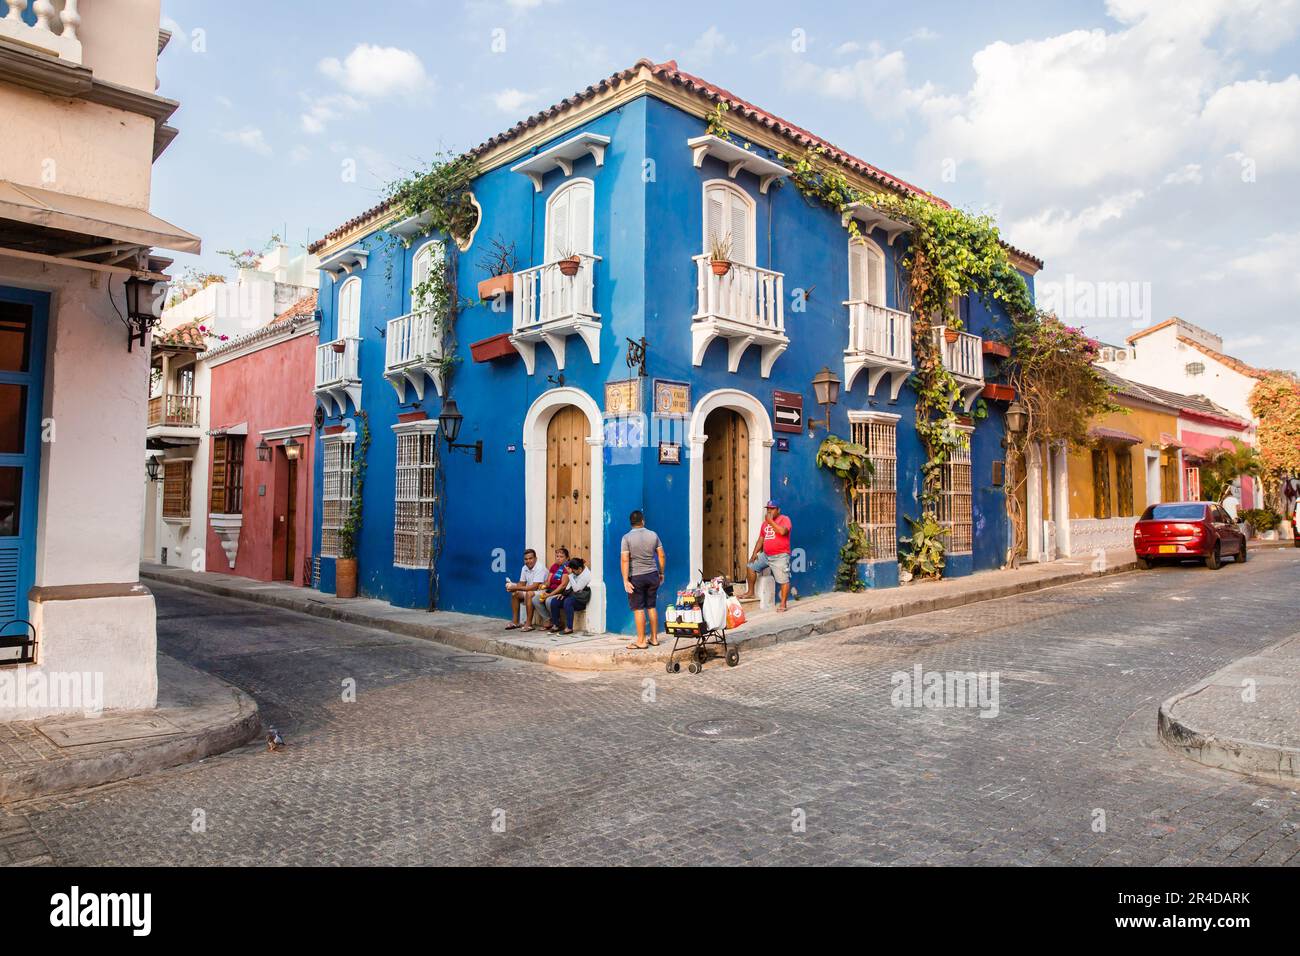 People sitting and wandering by a a bright blue corner building in Old Town Cartagena Colombia Stock Photo